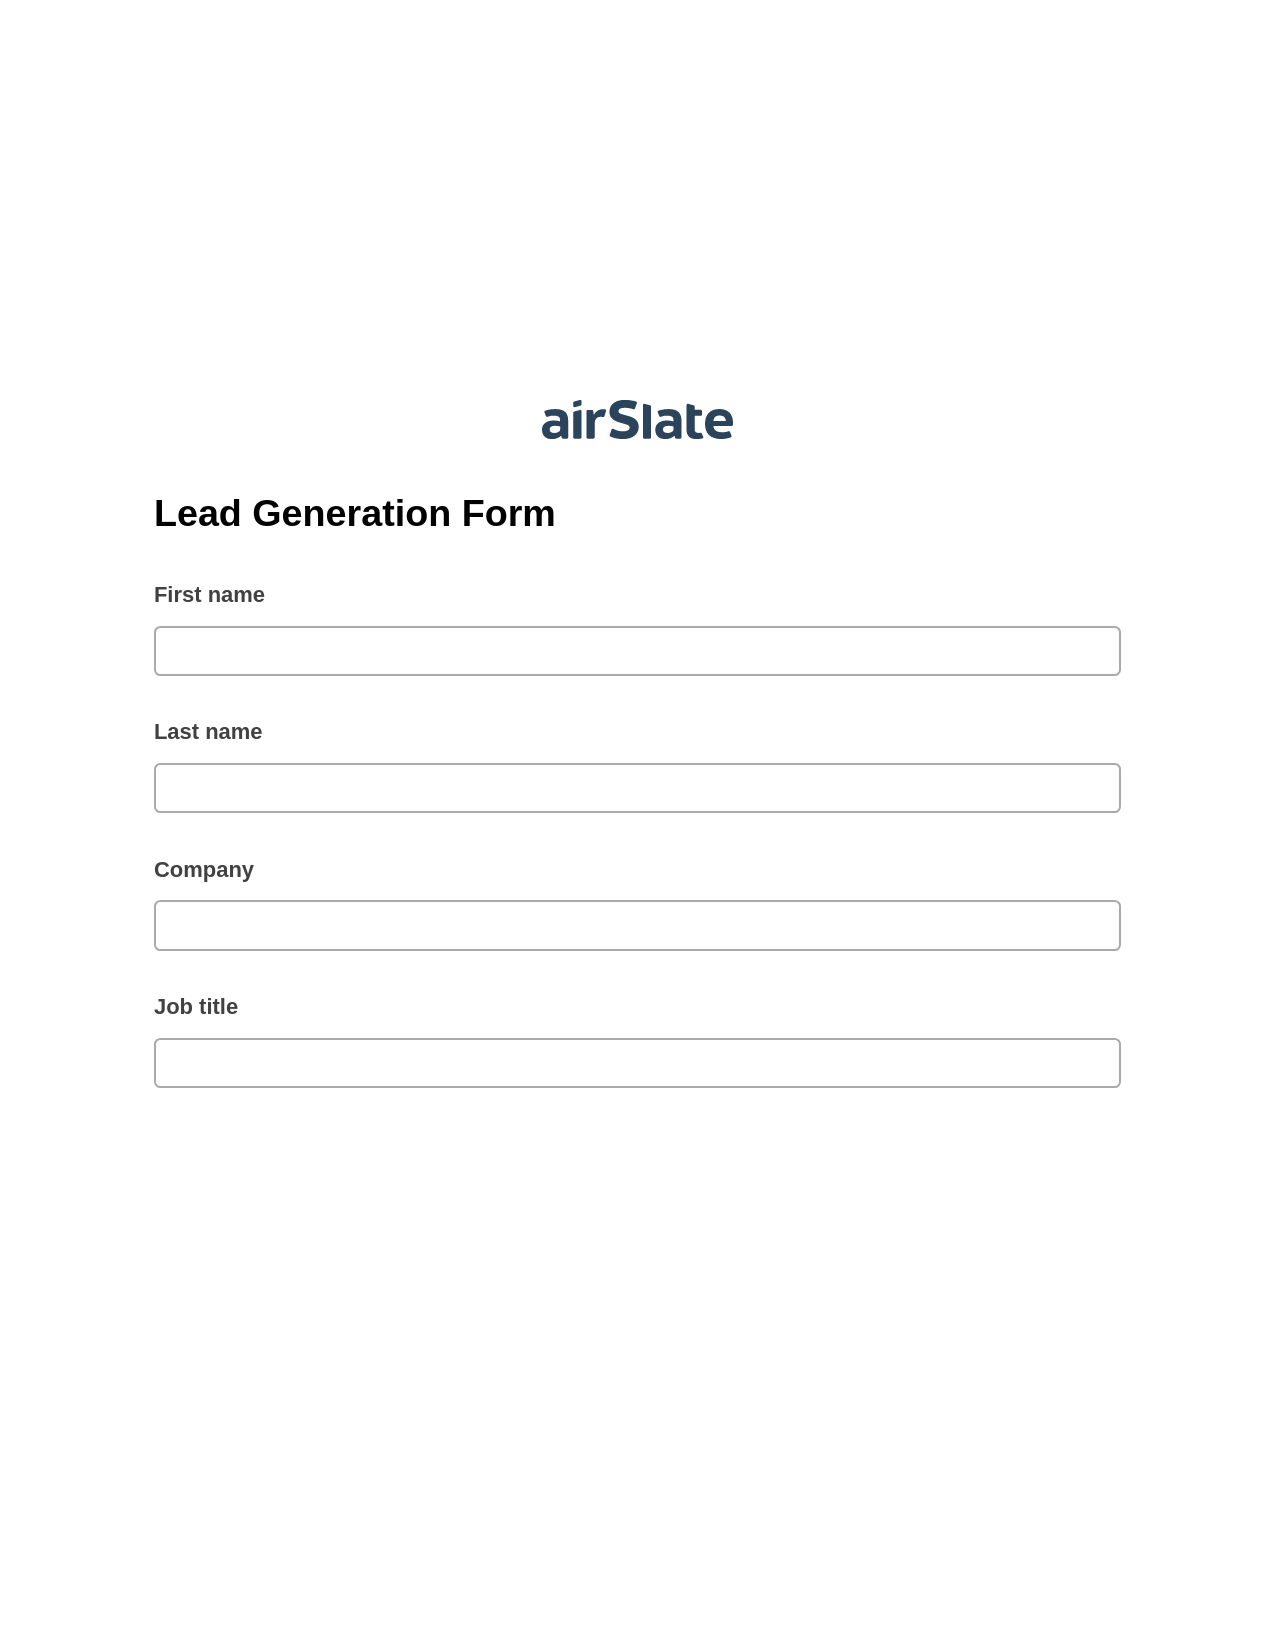 Lead Generation Form Pre-fill from MS Dynamics 365 Records, Create slate from another Flow Bot, Export to Google Sheet Bot